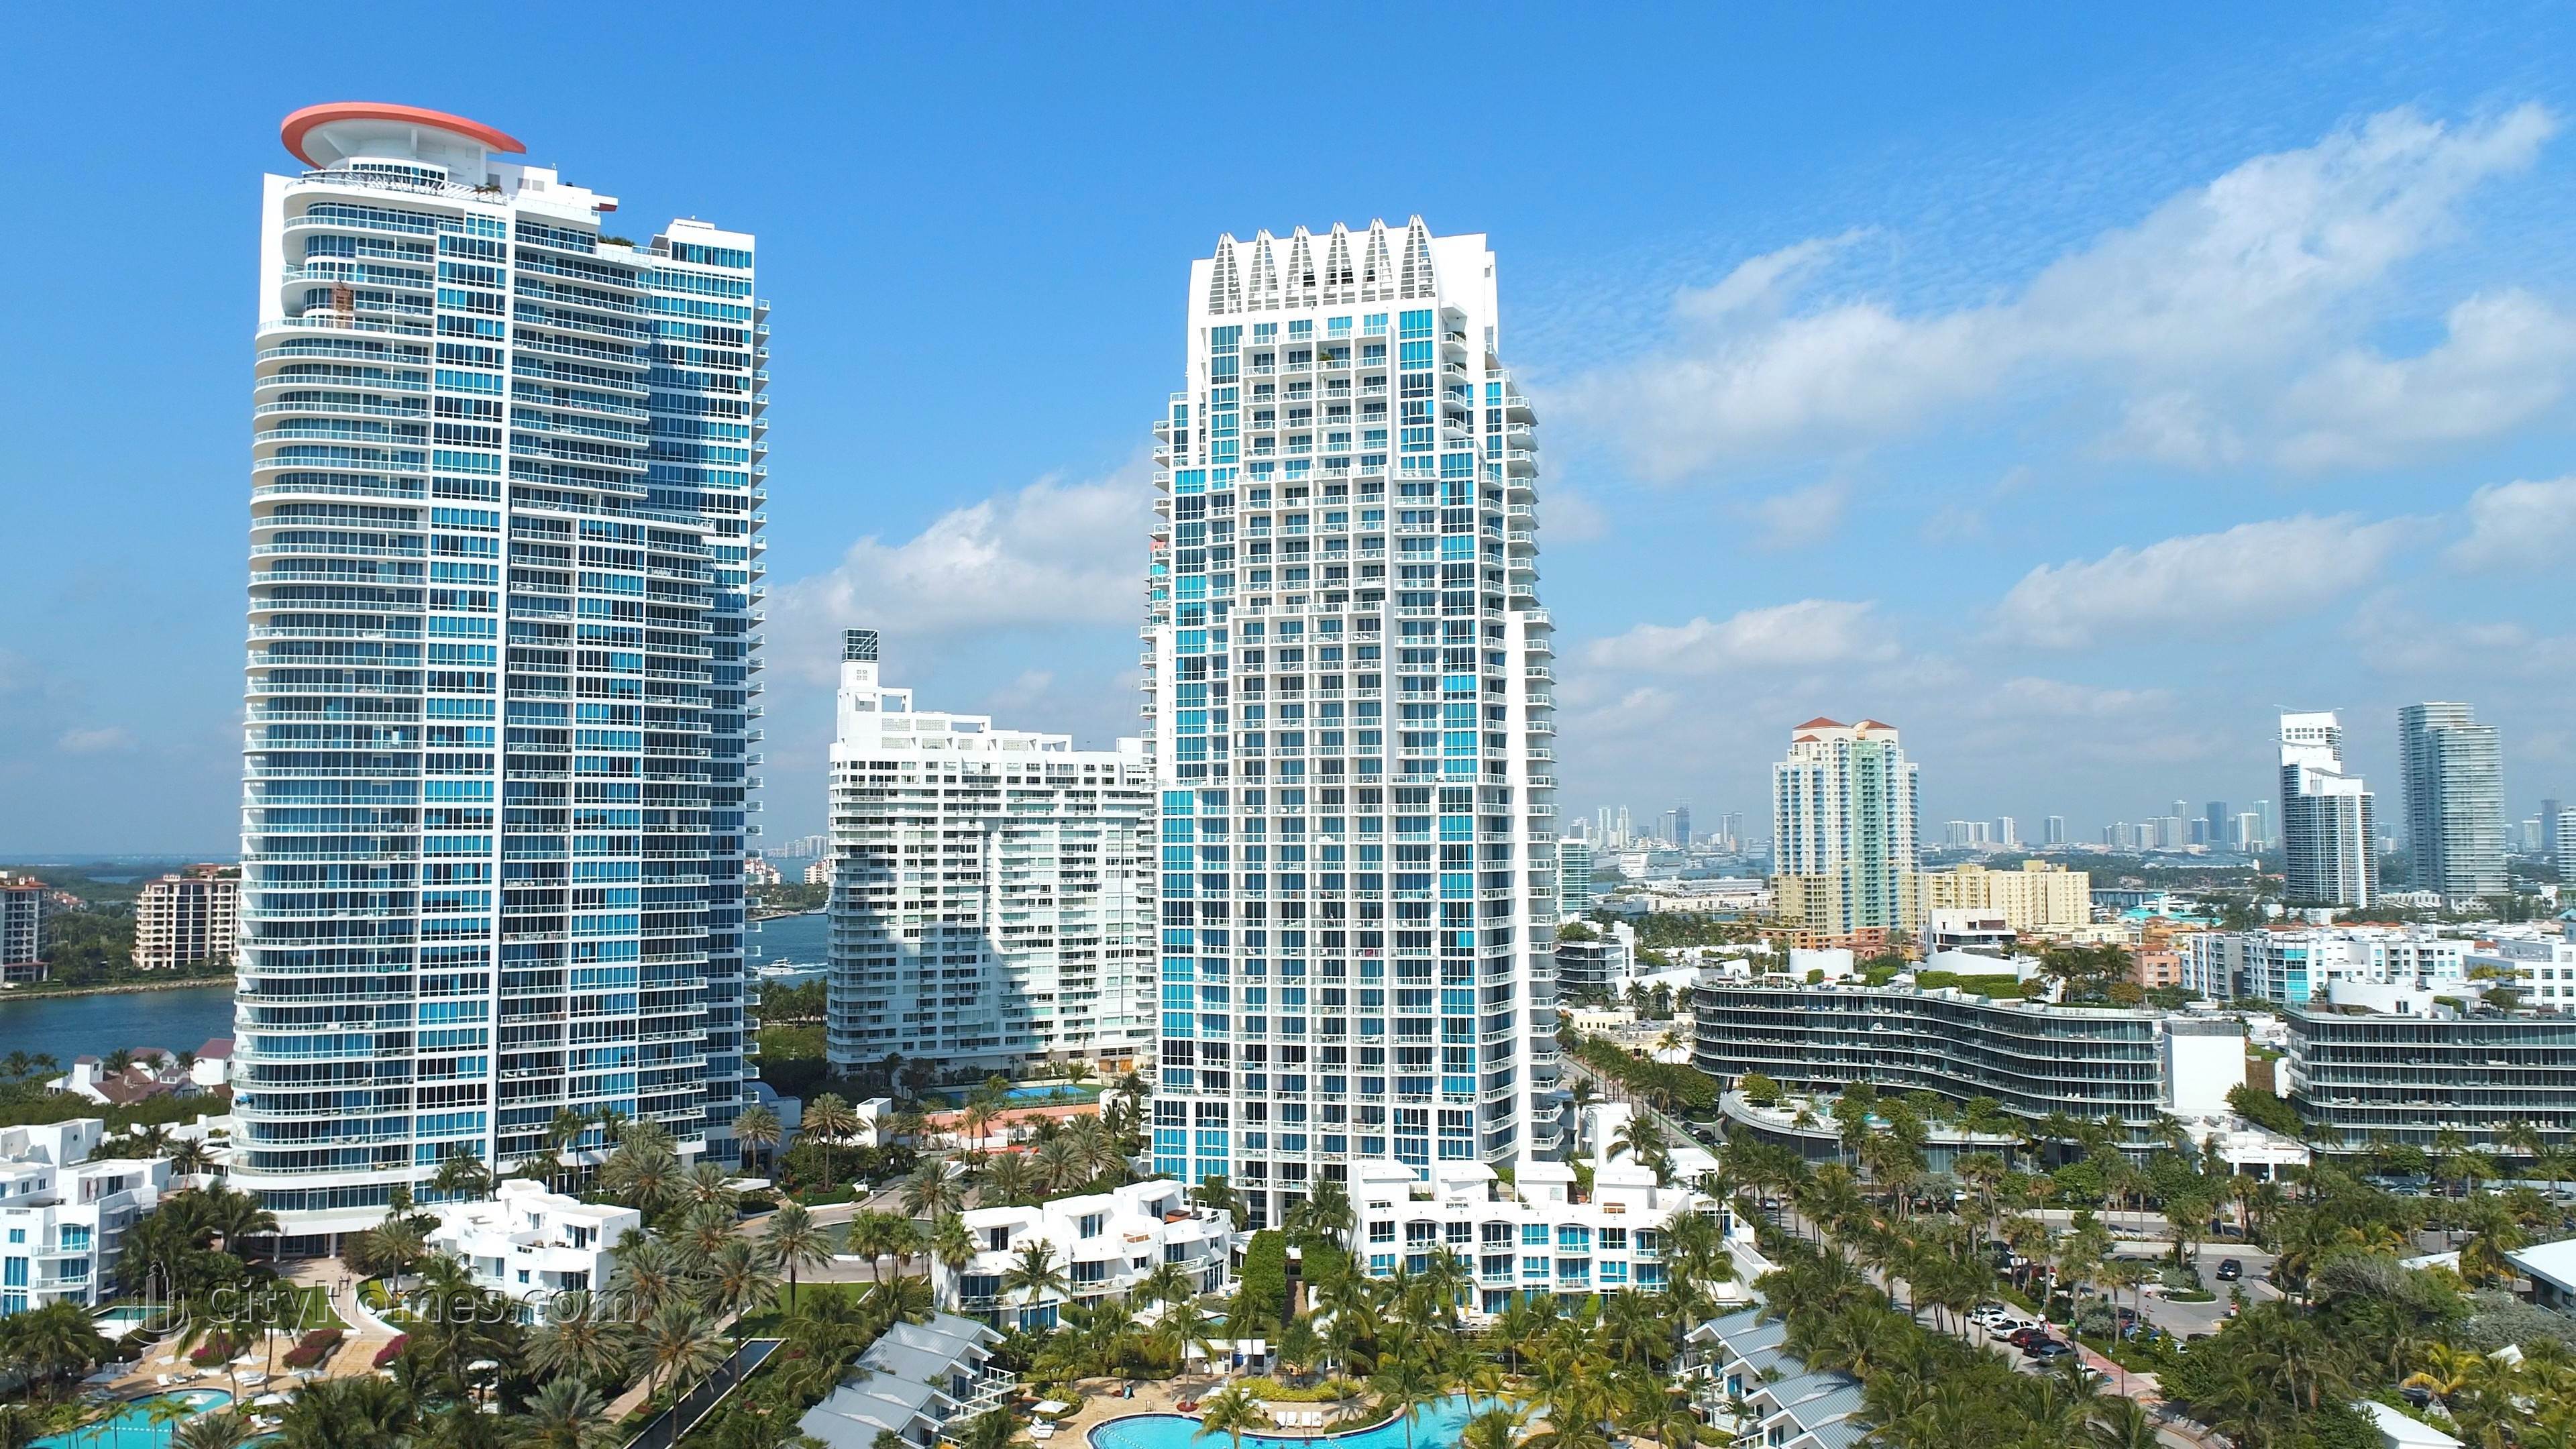 50 S Pointe Drive, South of Fifth, Miami Beach, FL 33139에 CONTINUUM NORTH TOWER 건물